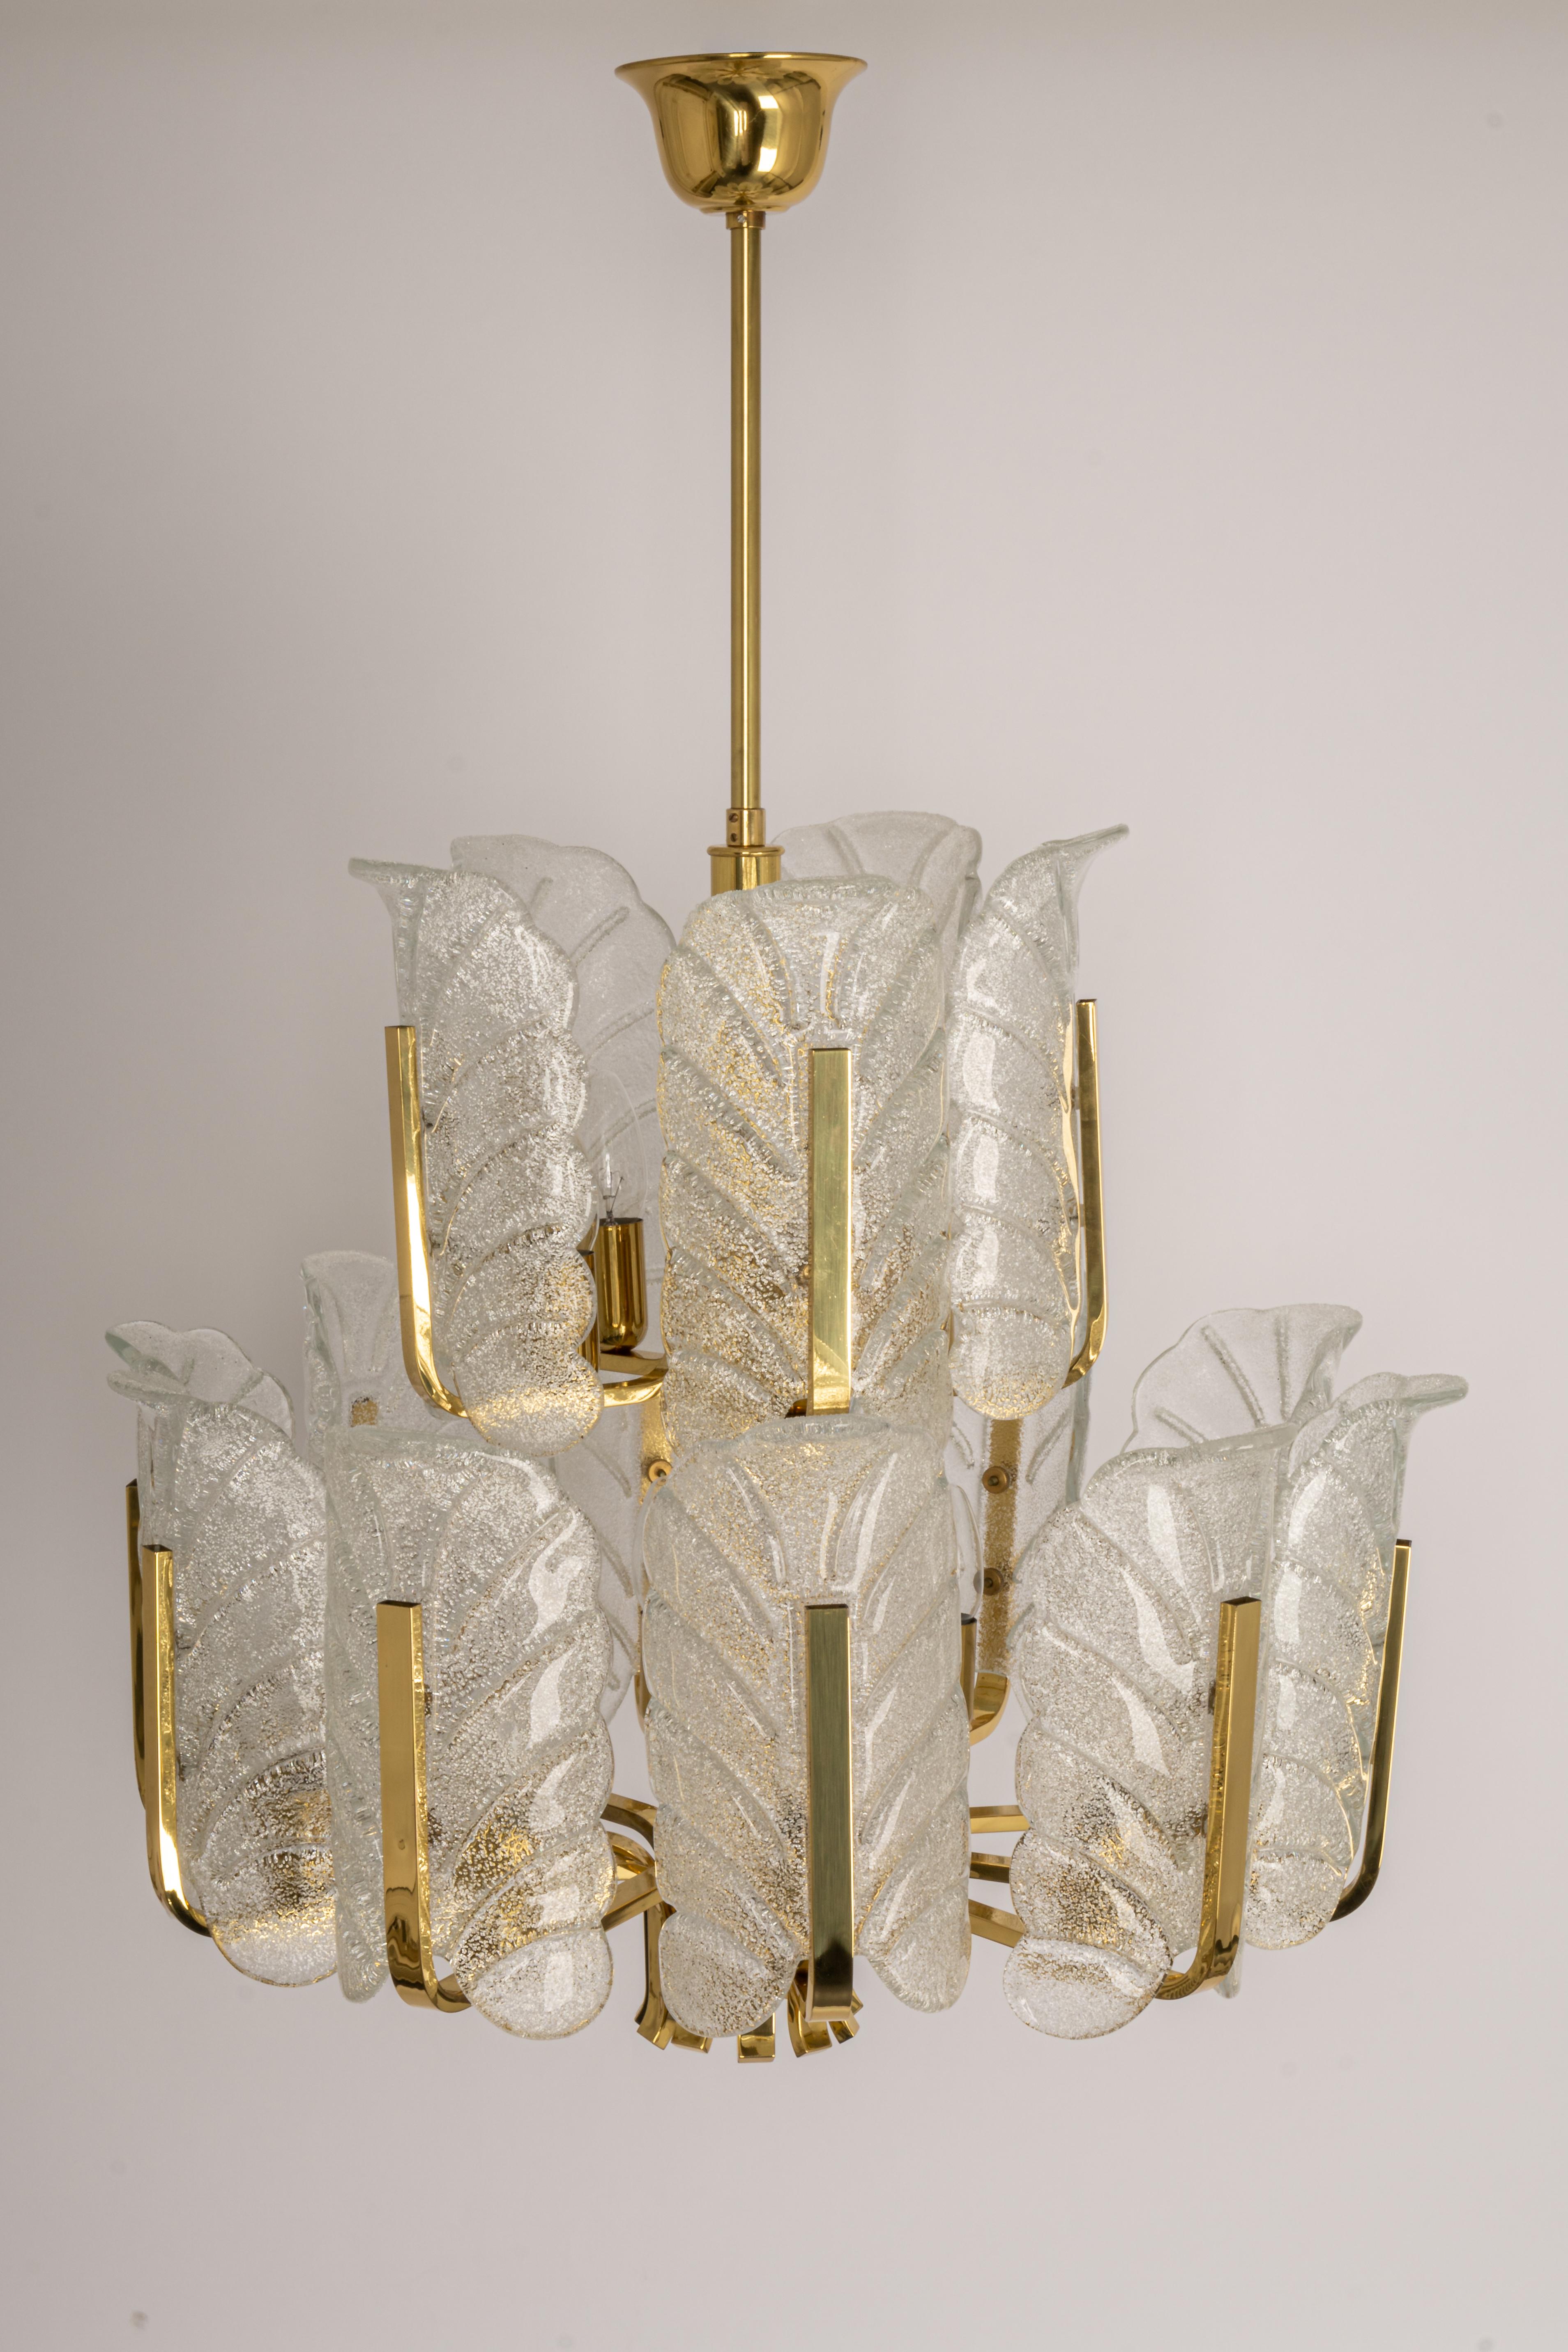 Very glamorous chandelier designed by Carl Fagerlund for Orrefors glass, Sweden, manufactured in midcentury, circa 1960-1969. The light features a polished brass frame with 15 stunning Murano glass leaves which have a matte frosted relief on the